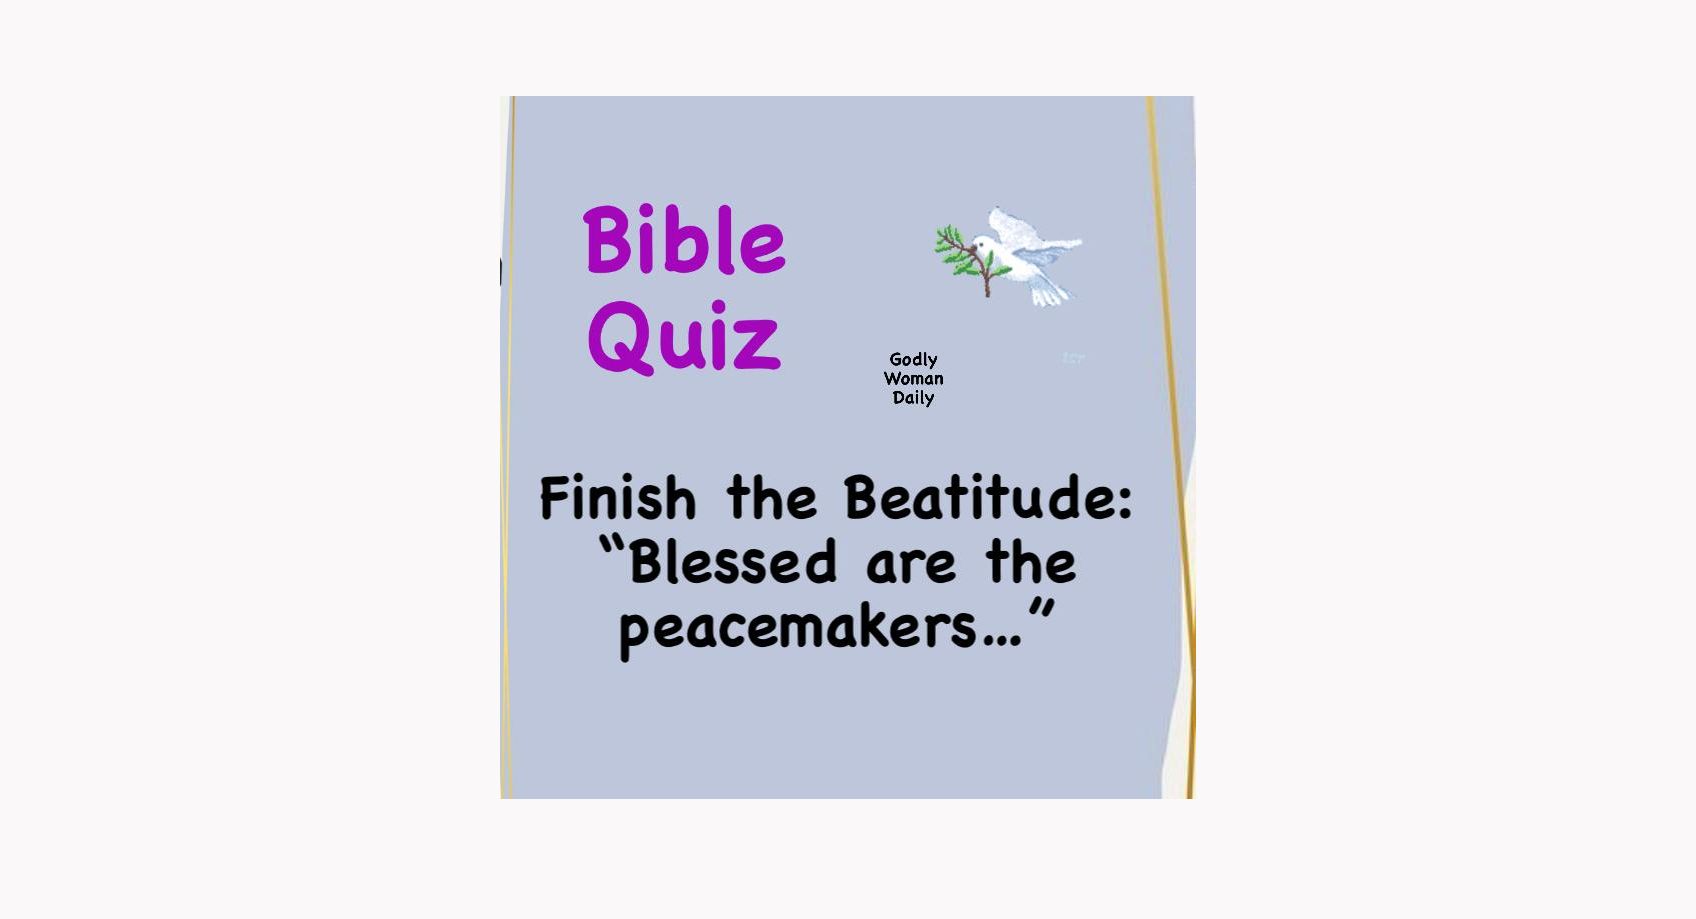 Finish the Beatitude: “Blessed are the peacemakers… - BIBLE QUIZ